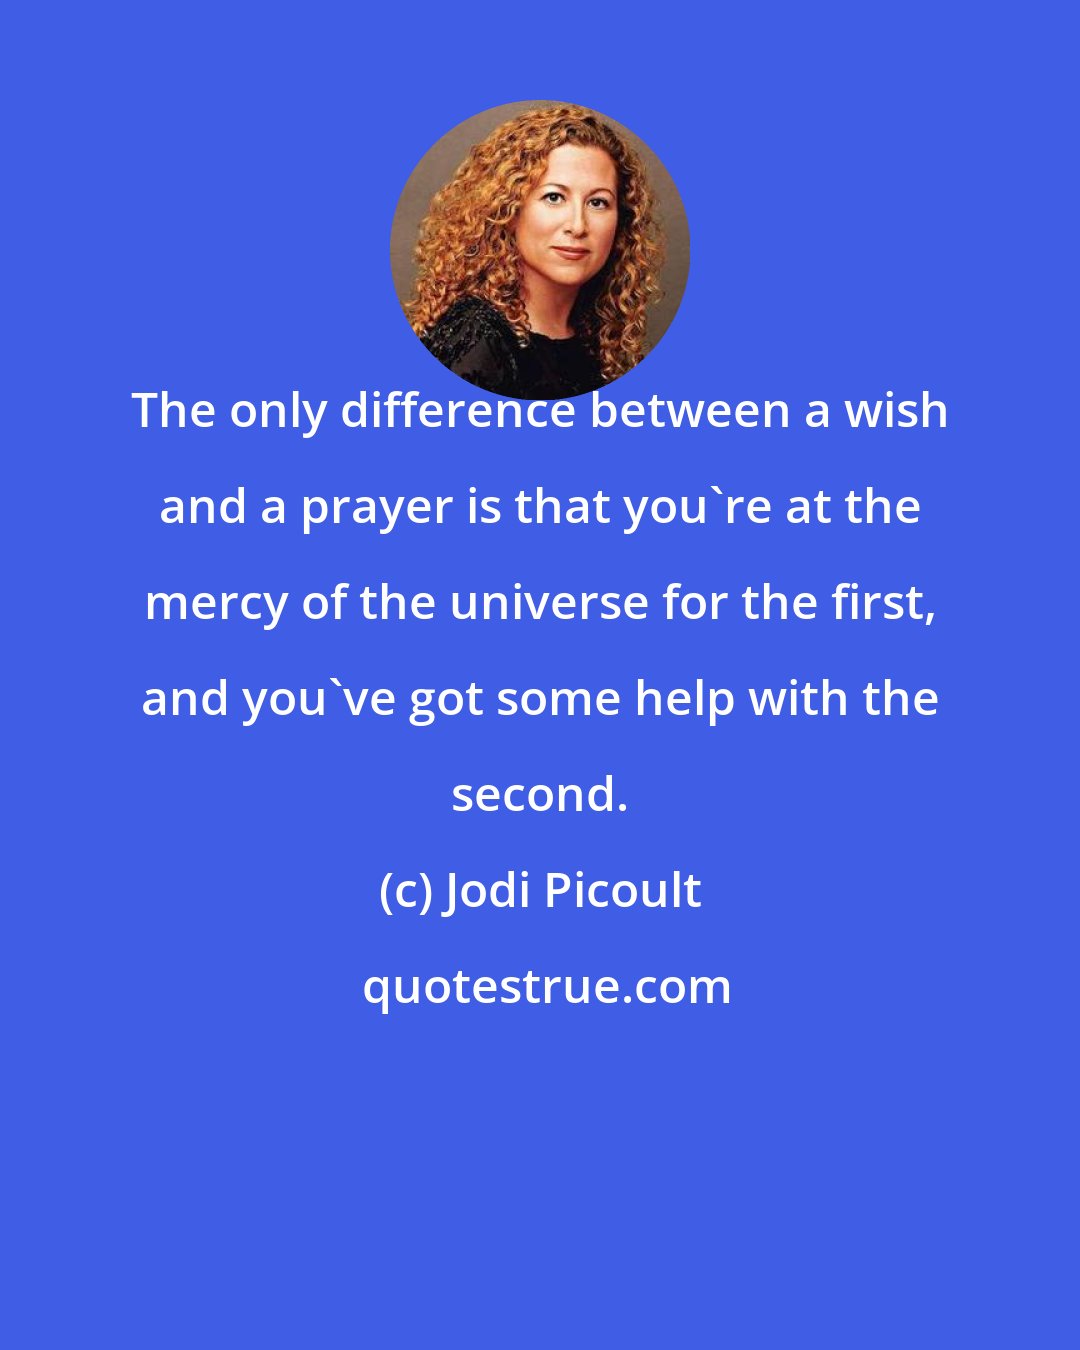 Jodi Picoult: The only difference between a wish and a prayer is that you're at the mercy of the universe for the first, and you've got some help with the second.